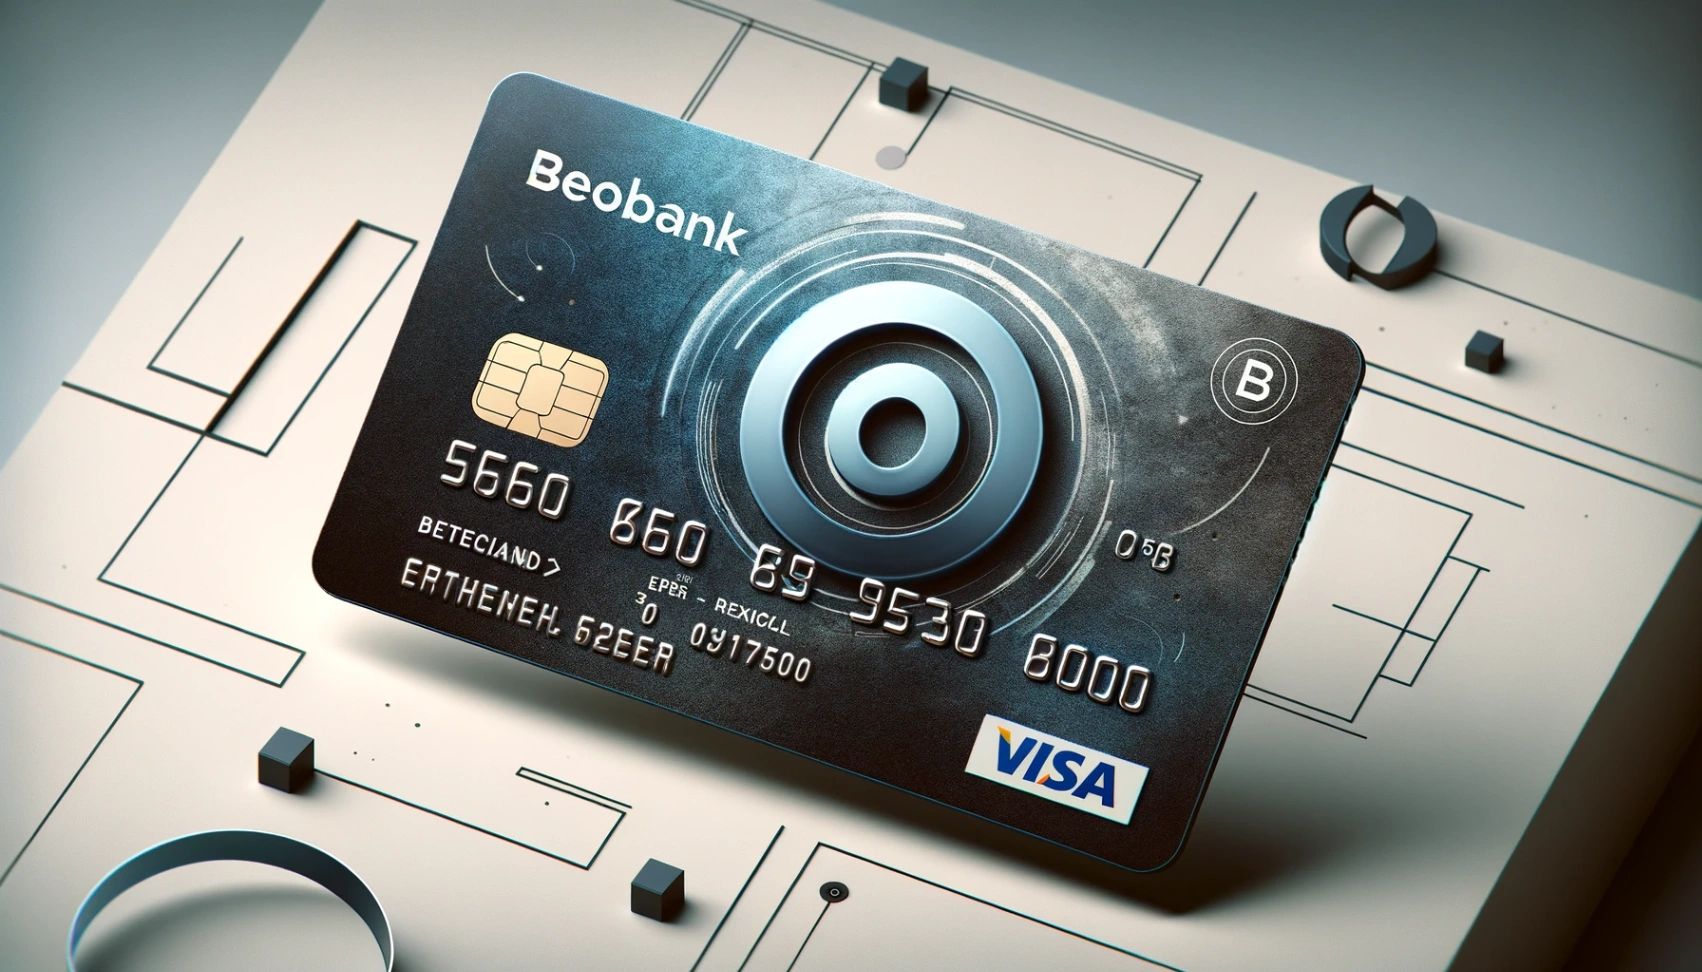 How to Apply for Q8 Beobank Credit Card in Belgium